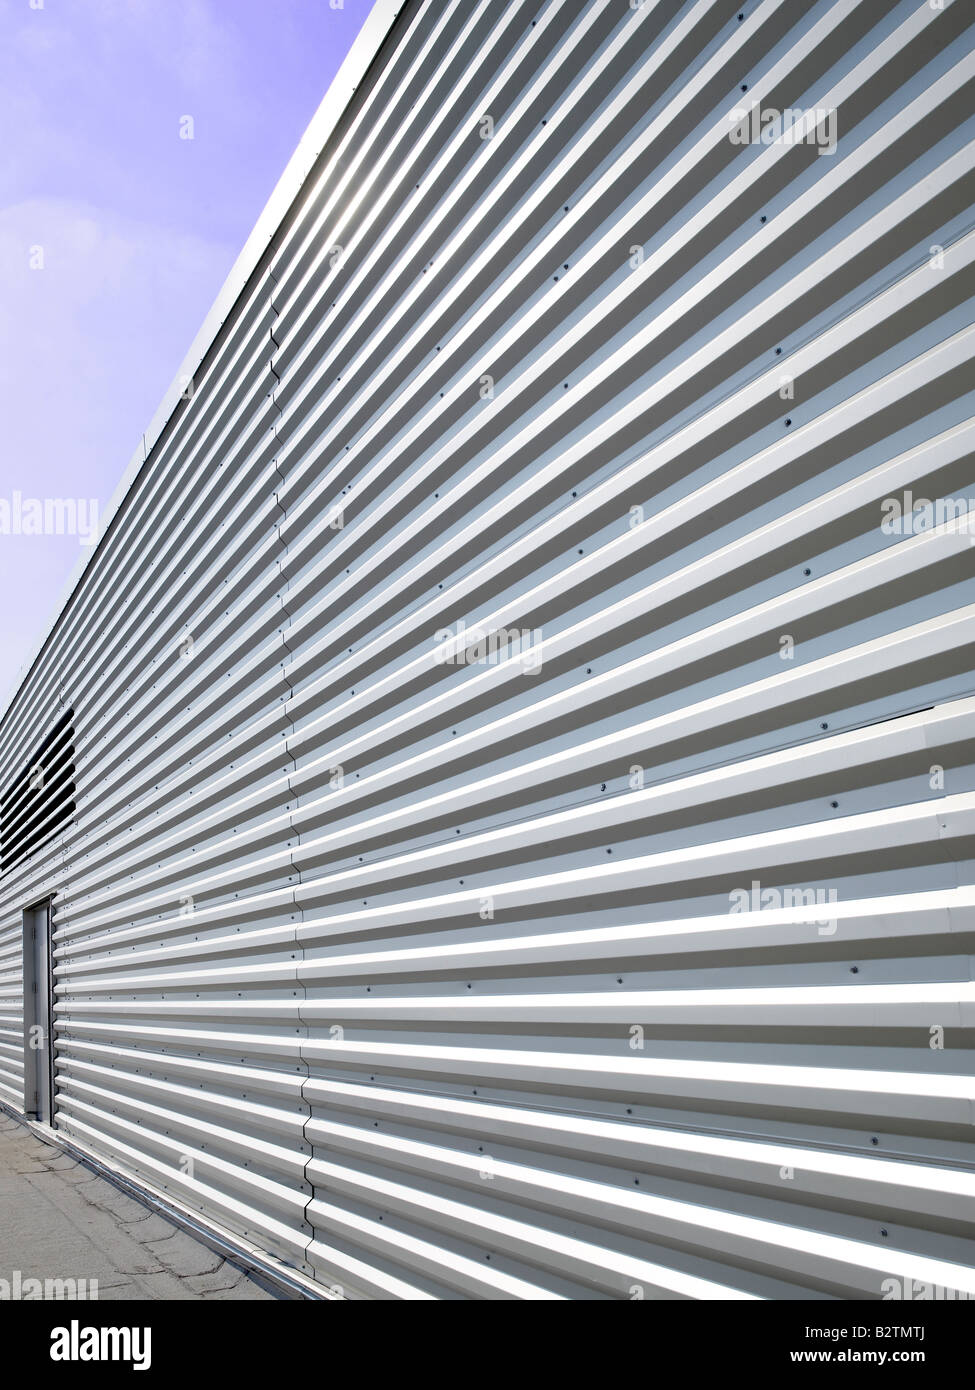 Corrugated Metal Wall Silver Shiny Building Stock Photo